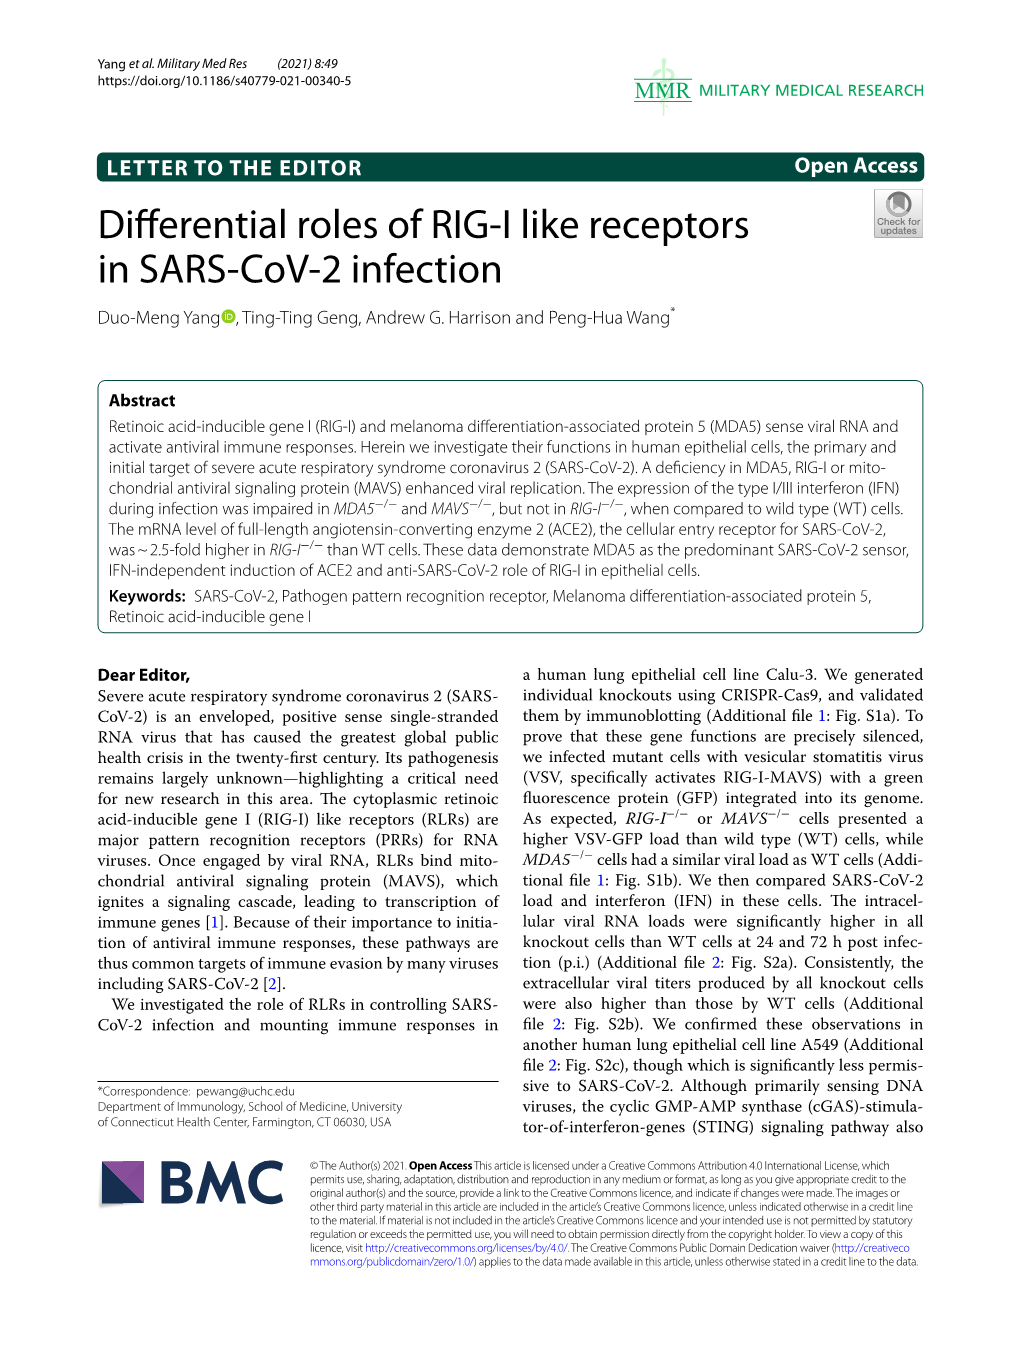 Differential Roles of RIG-I Like Receptors in SARS-Cov-2 Infection